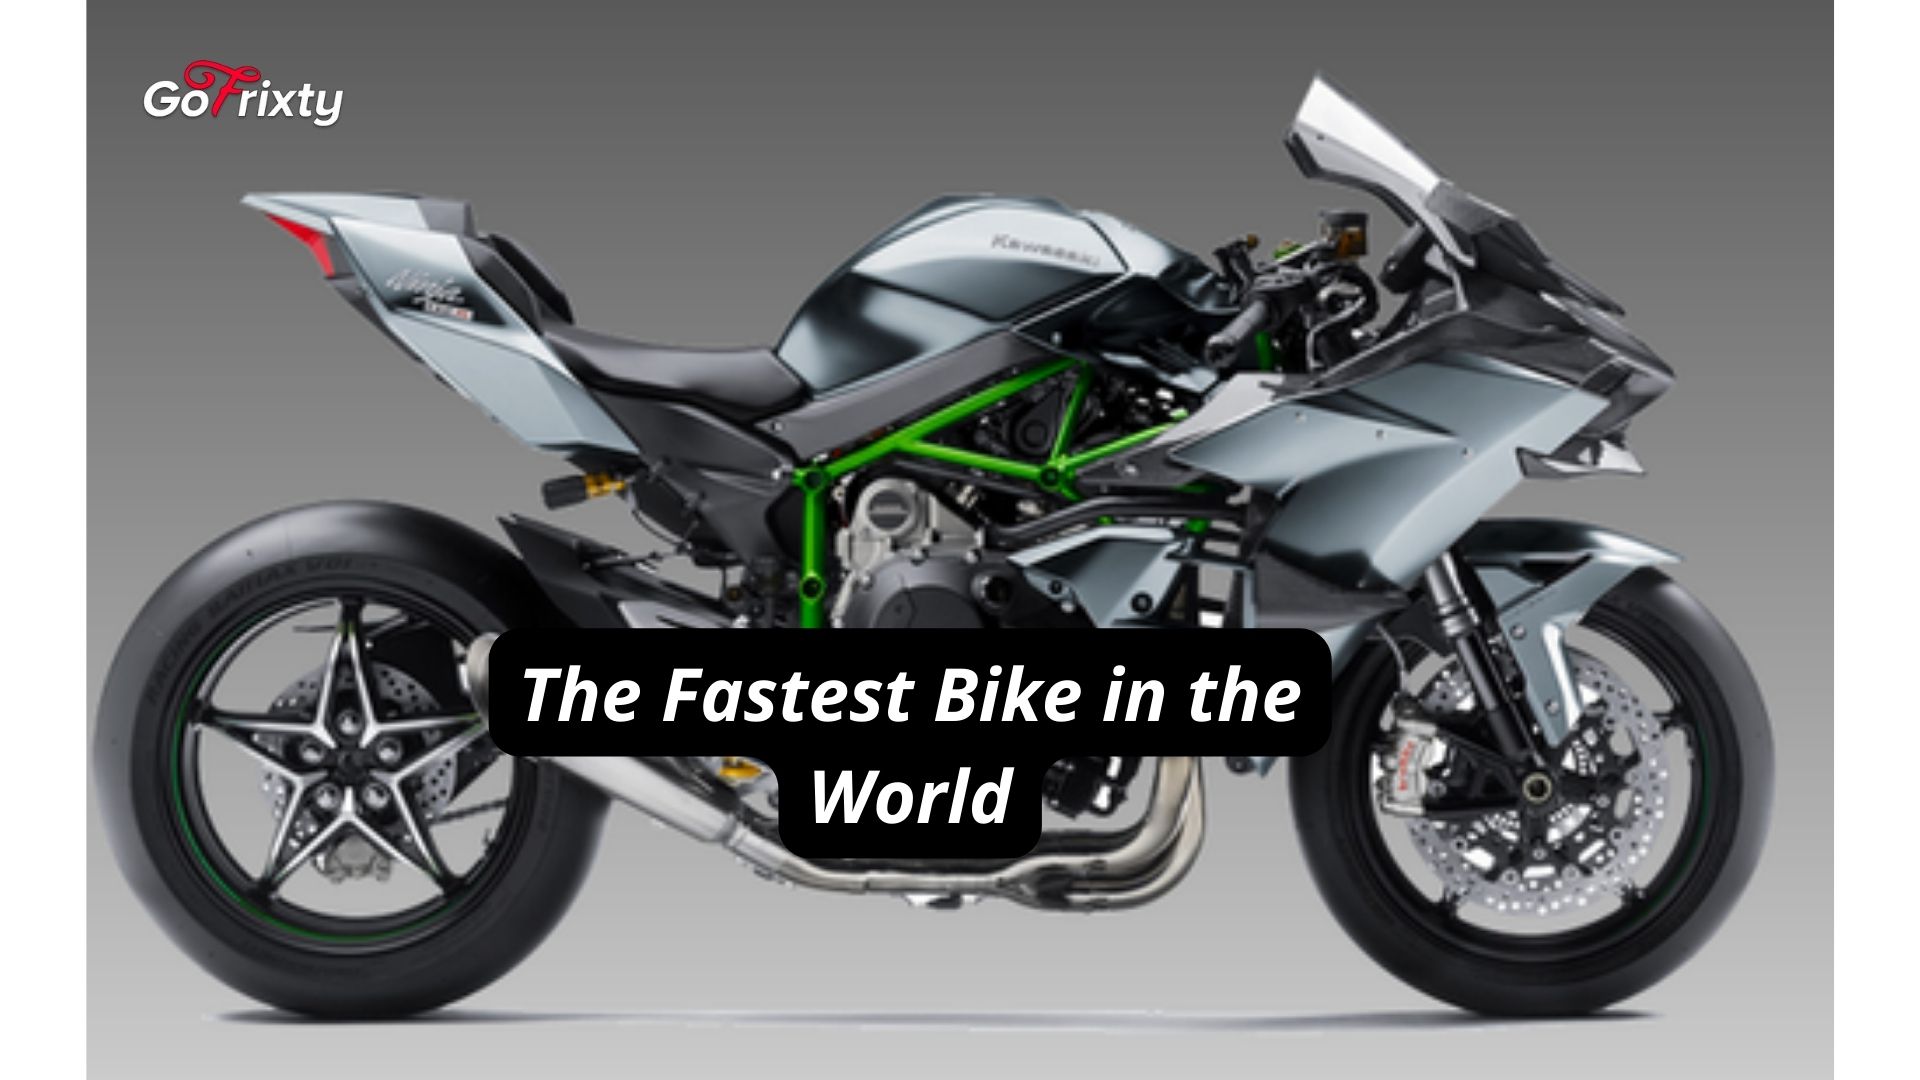 The Fastest Bike in the World